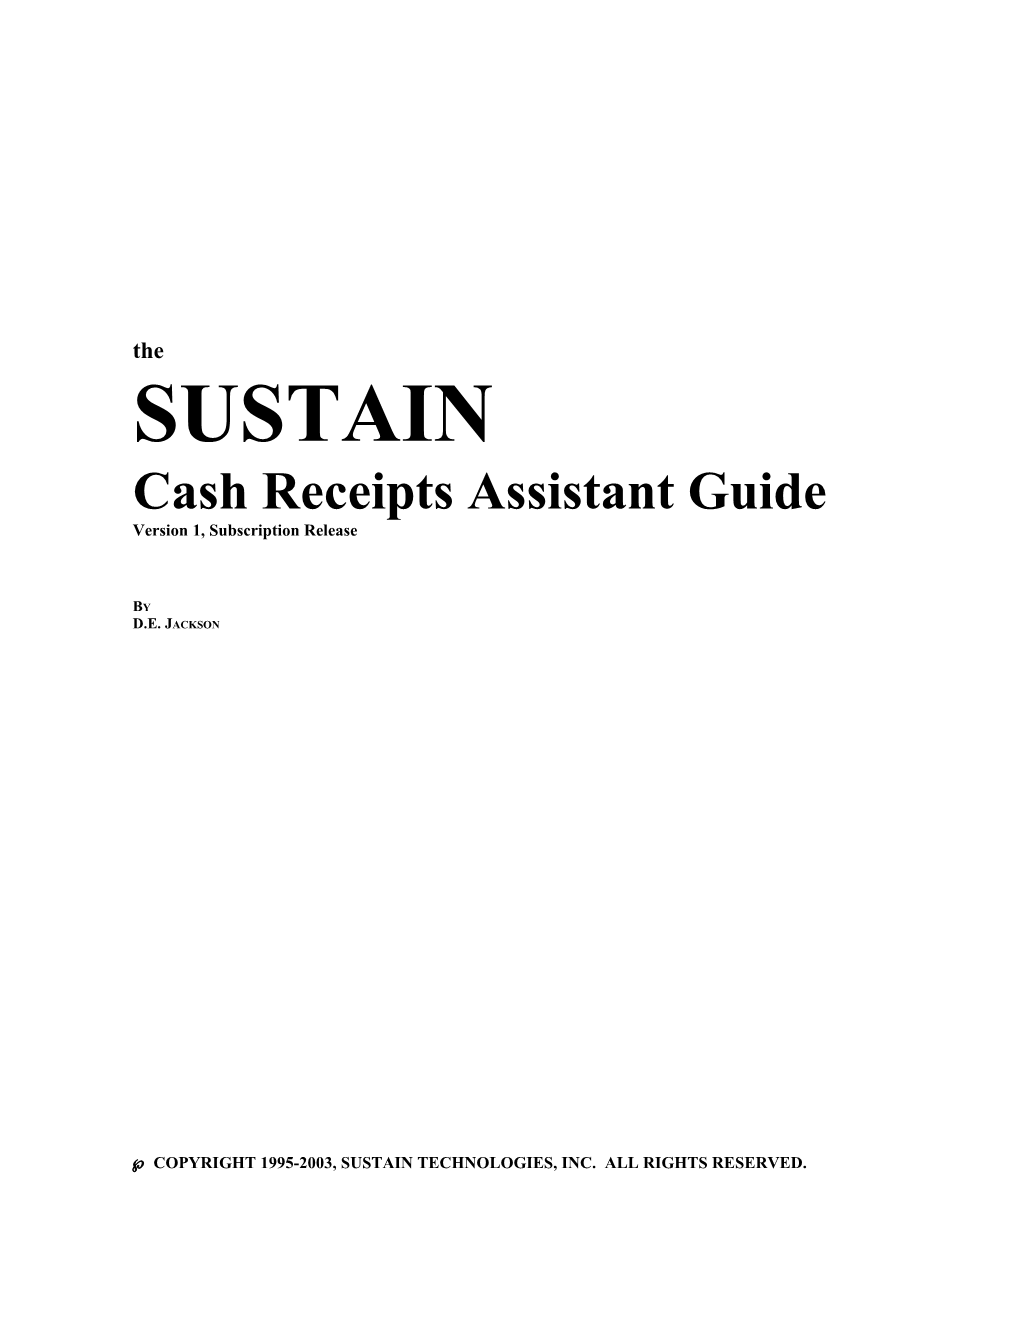 The SUSTAIN Cash Receipts Assistant Guide